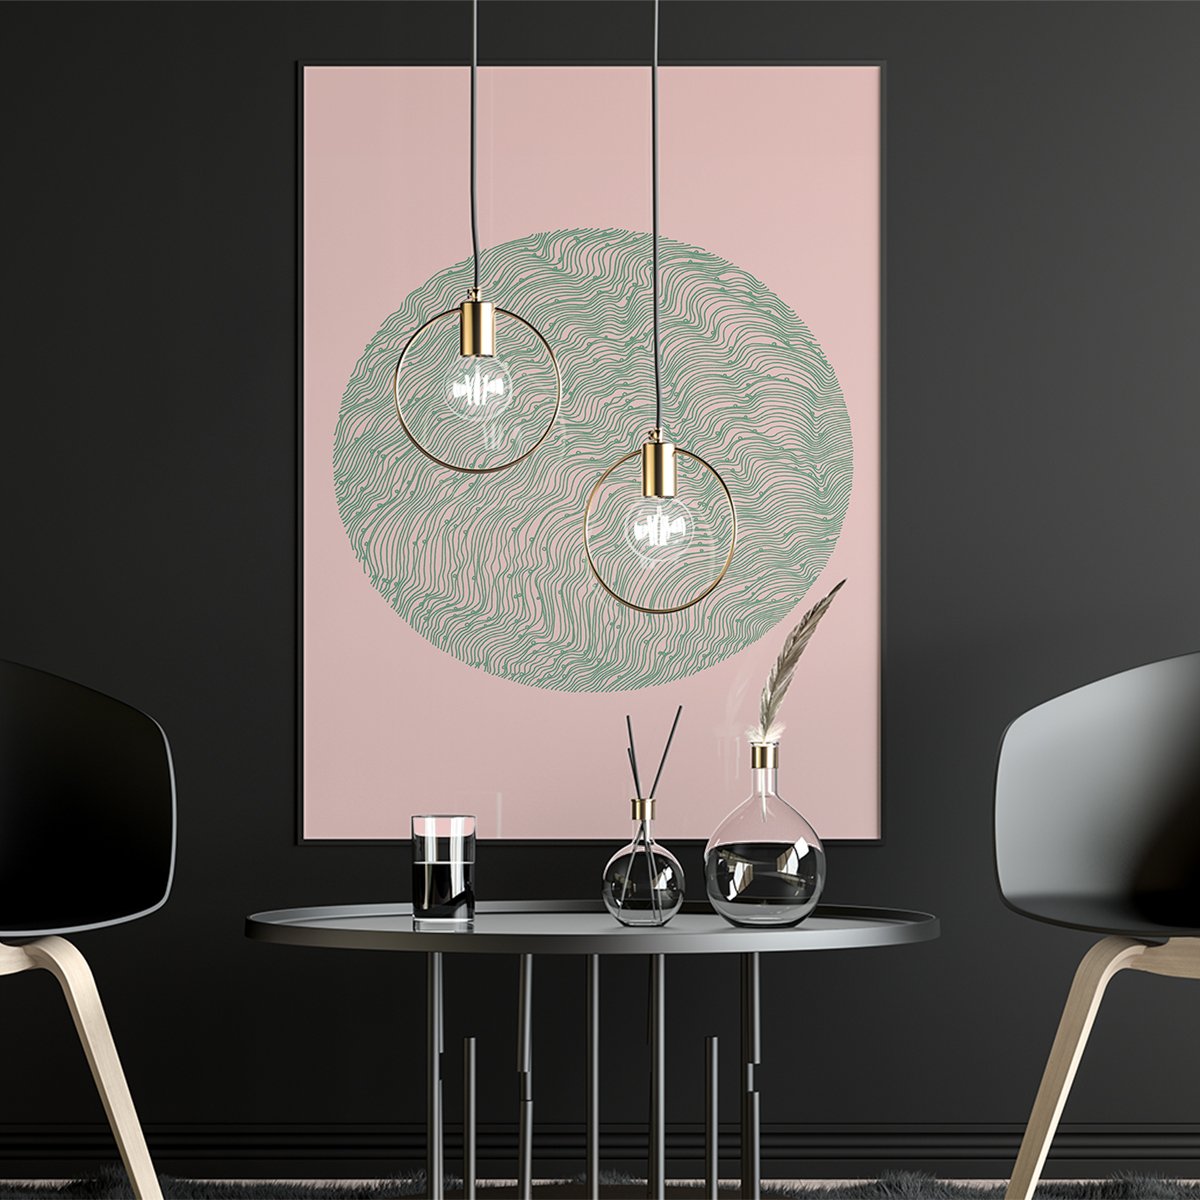  Circle, art print, print, pink green, pink and green, green and pink, mid century modern, illustration, etsy, etsy shop, illustration, art, wall art, home décor, design, design and illustration, illustrator, chd, claire heffer design, ch design, fil